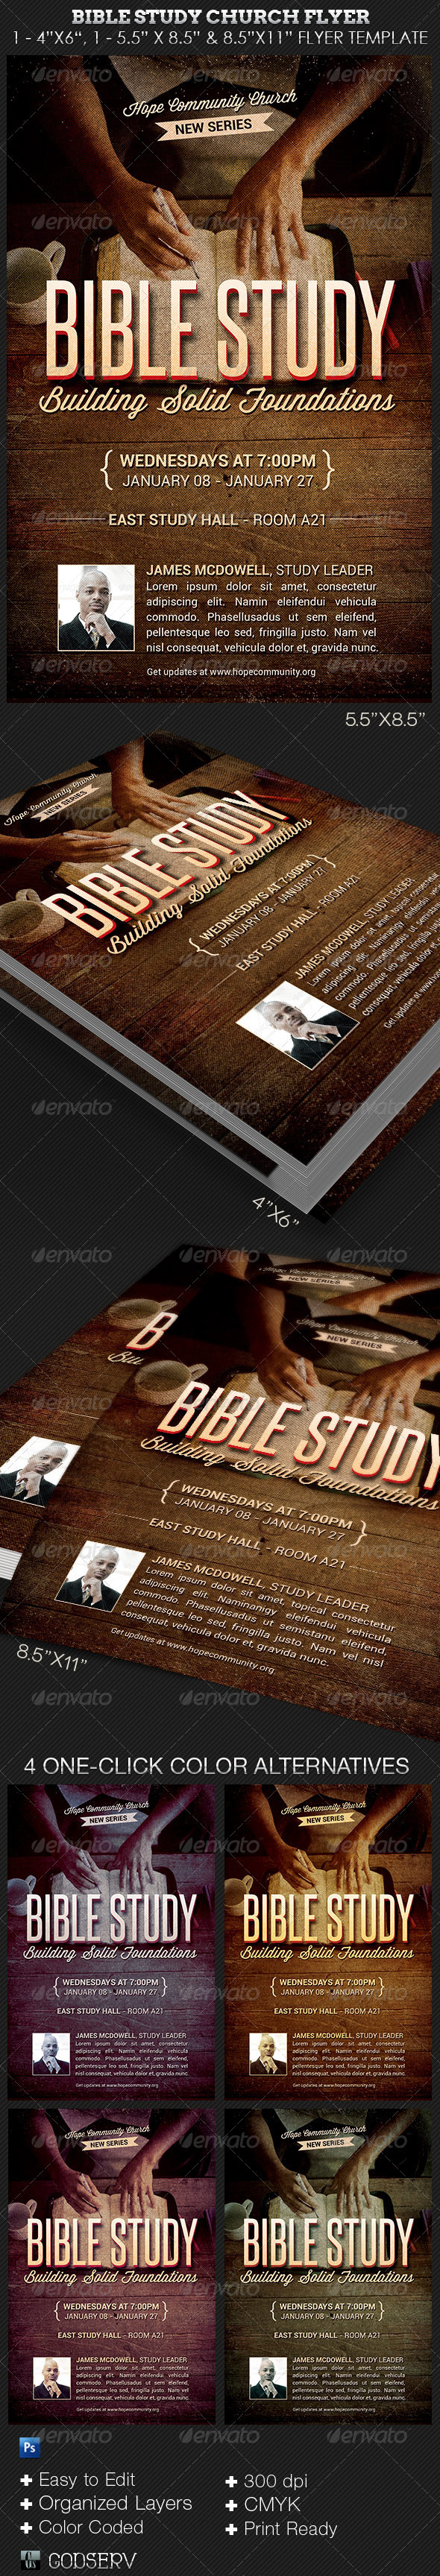 Bible Study Church Flyer Photoshop Template on Behance Regarding Bible Study Flyer Template Free